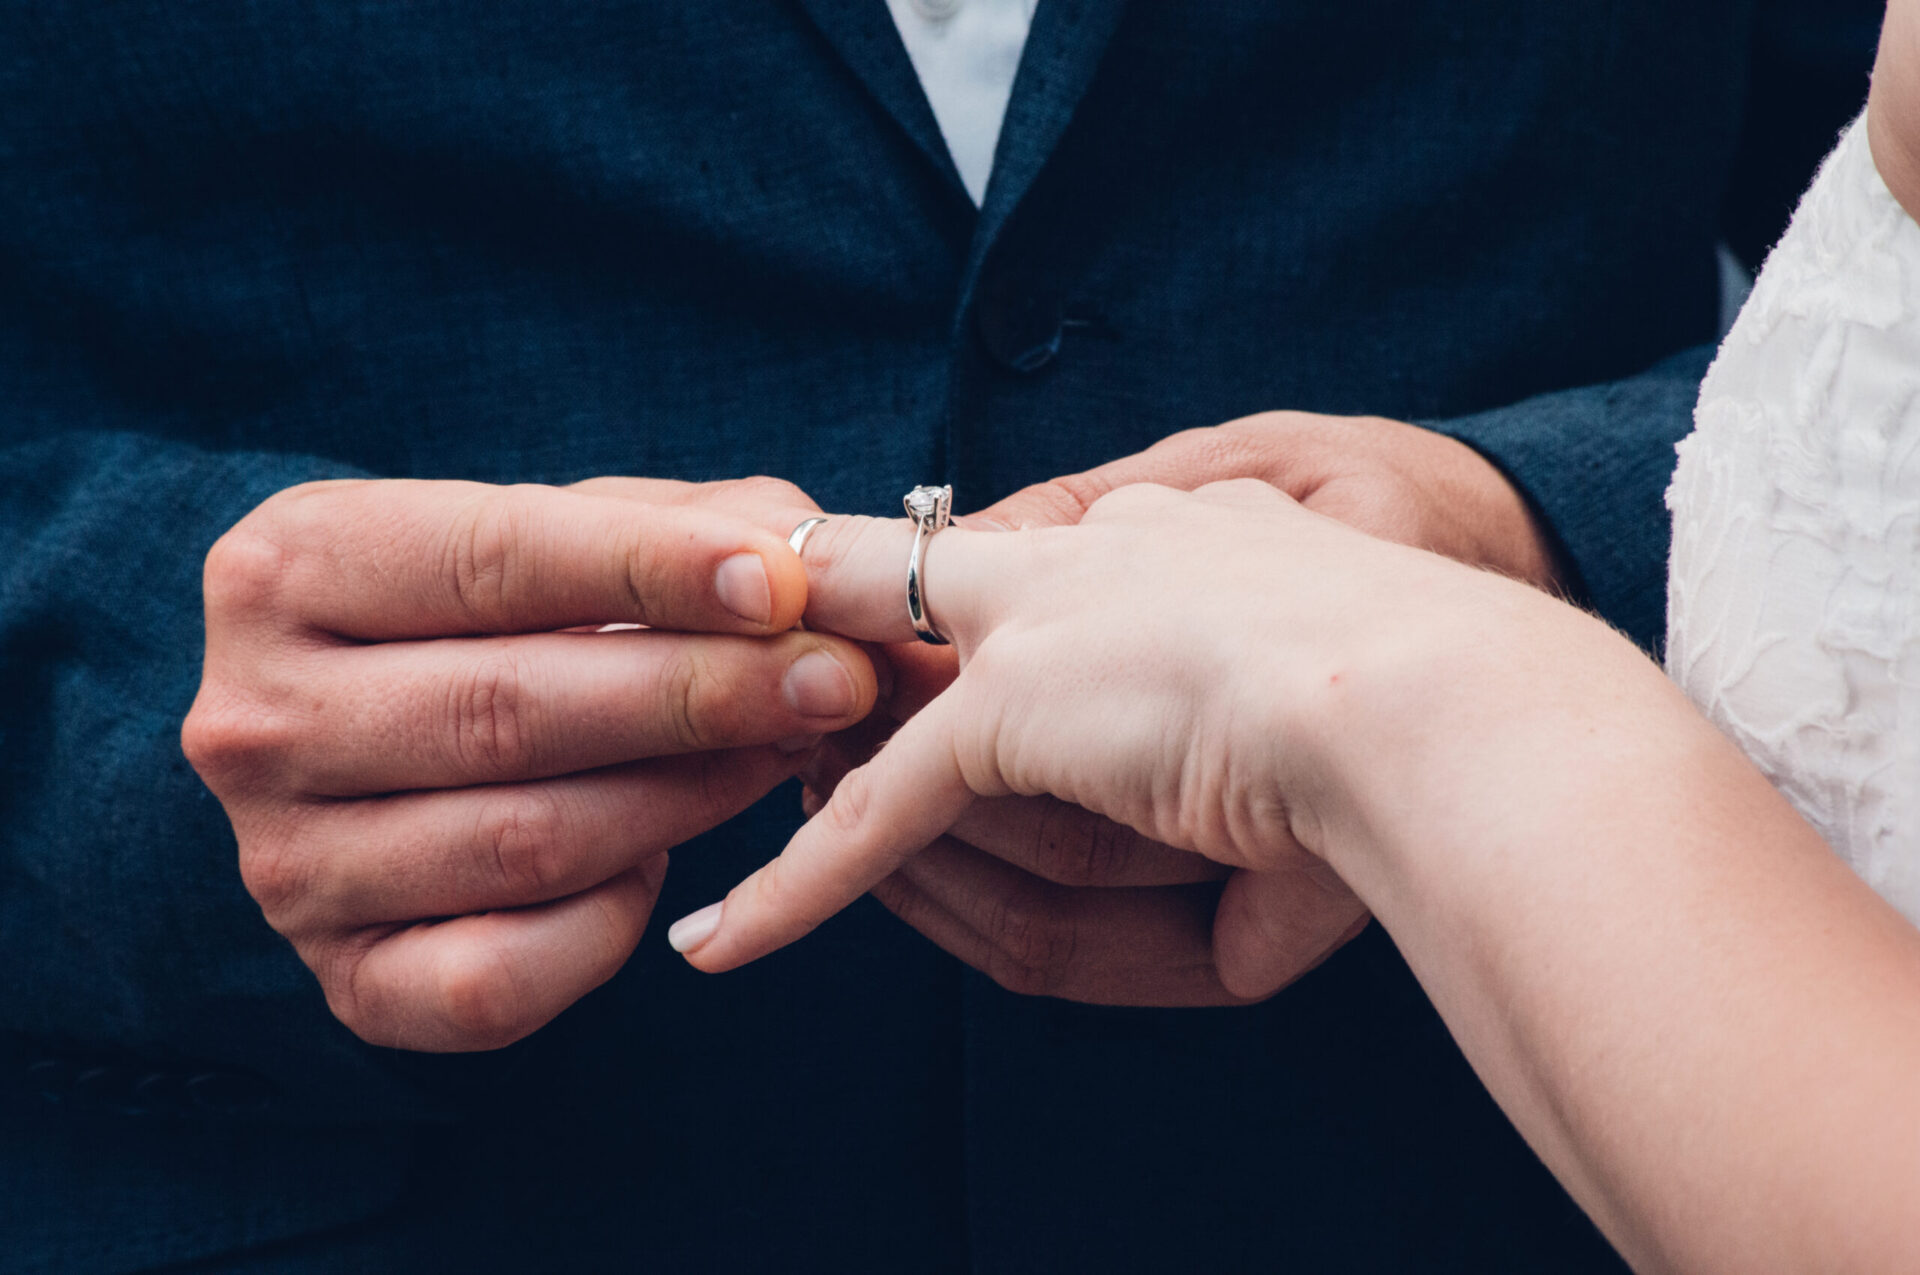 Person in suit putting a wedding ring on another person's finger.